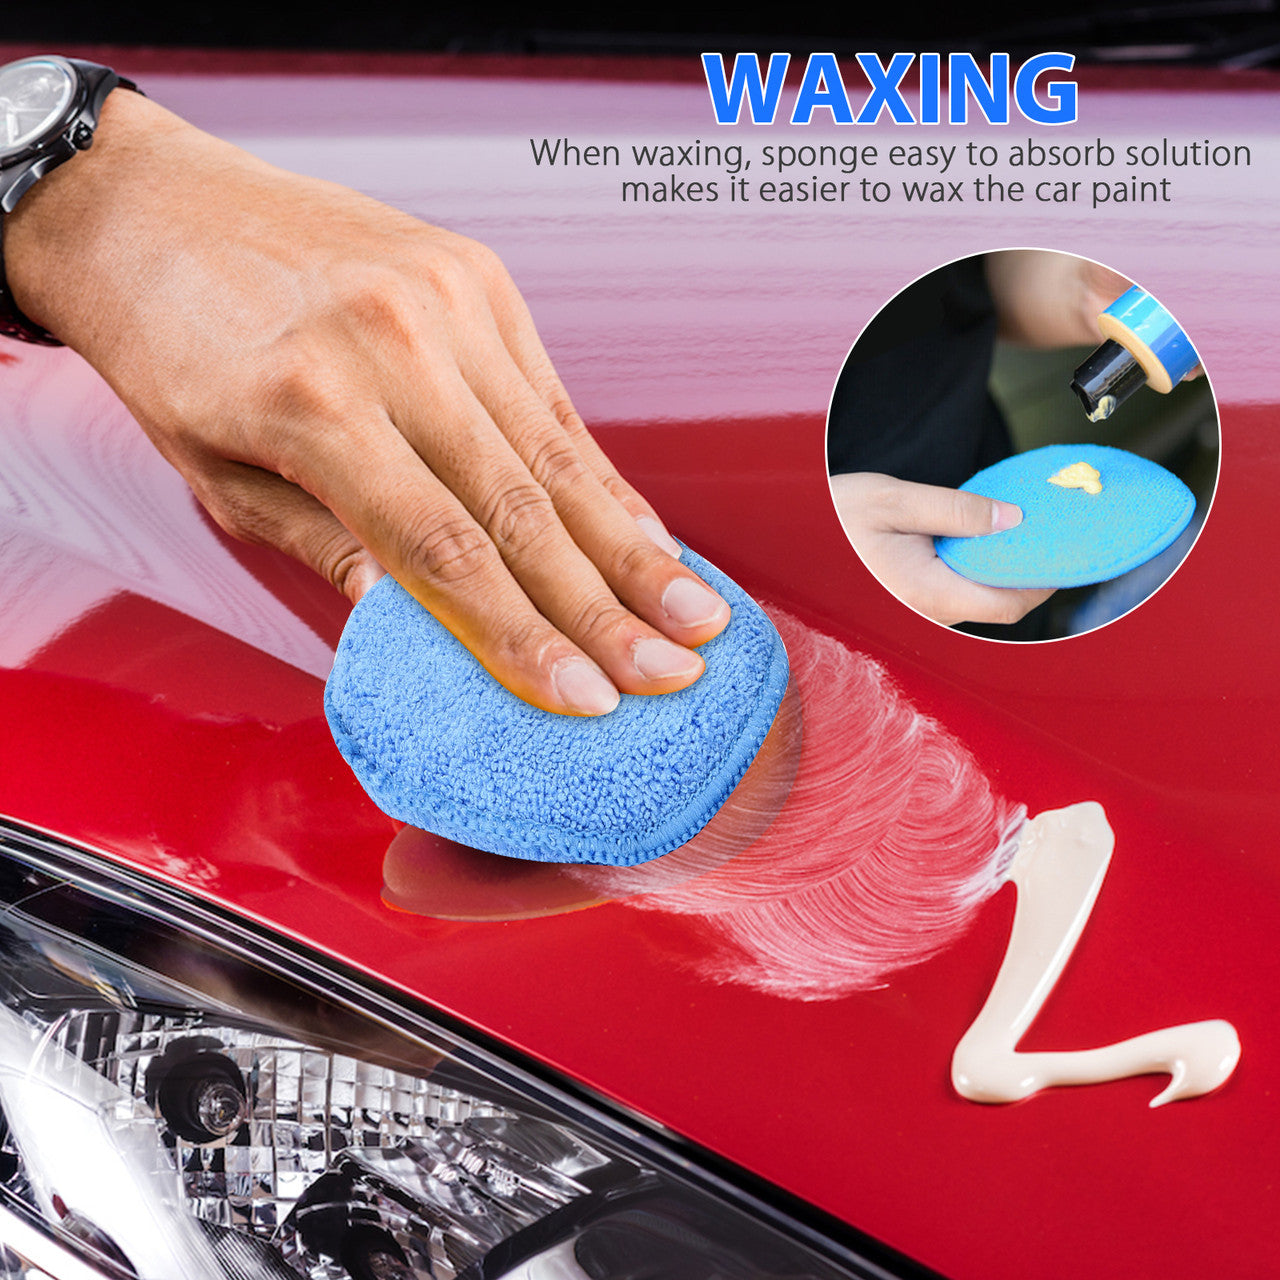 10Pcs 5" Car Wax Foam Sponge Applicator, Microfiber Applicator Cleaning Pads Car Detailing Tool for Waxing, Car Wash Cleaning Supplies for Car Interior Desk, Leather Seats, Bumpers